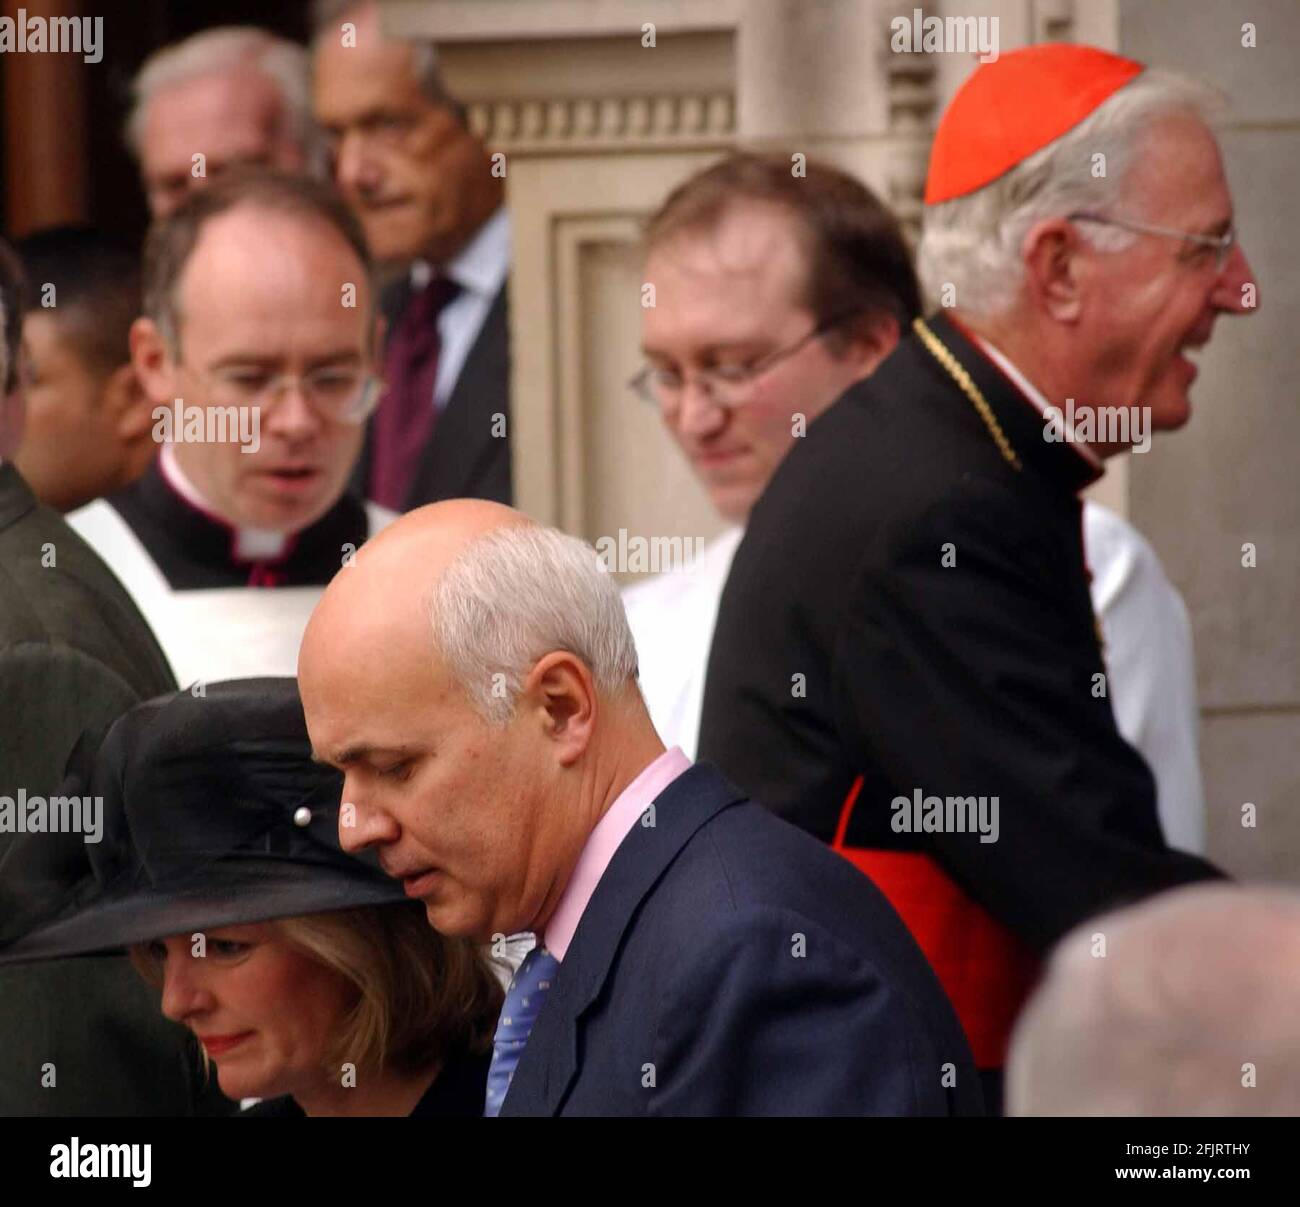 IAIN DUNCAN SMITH AT THE MEMORIAL TO PAUL GETTY AT WESTMINSTER CATHEDRAL.9/9/03 PILSTON Stock Photo